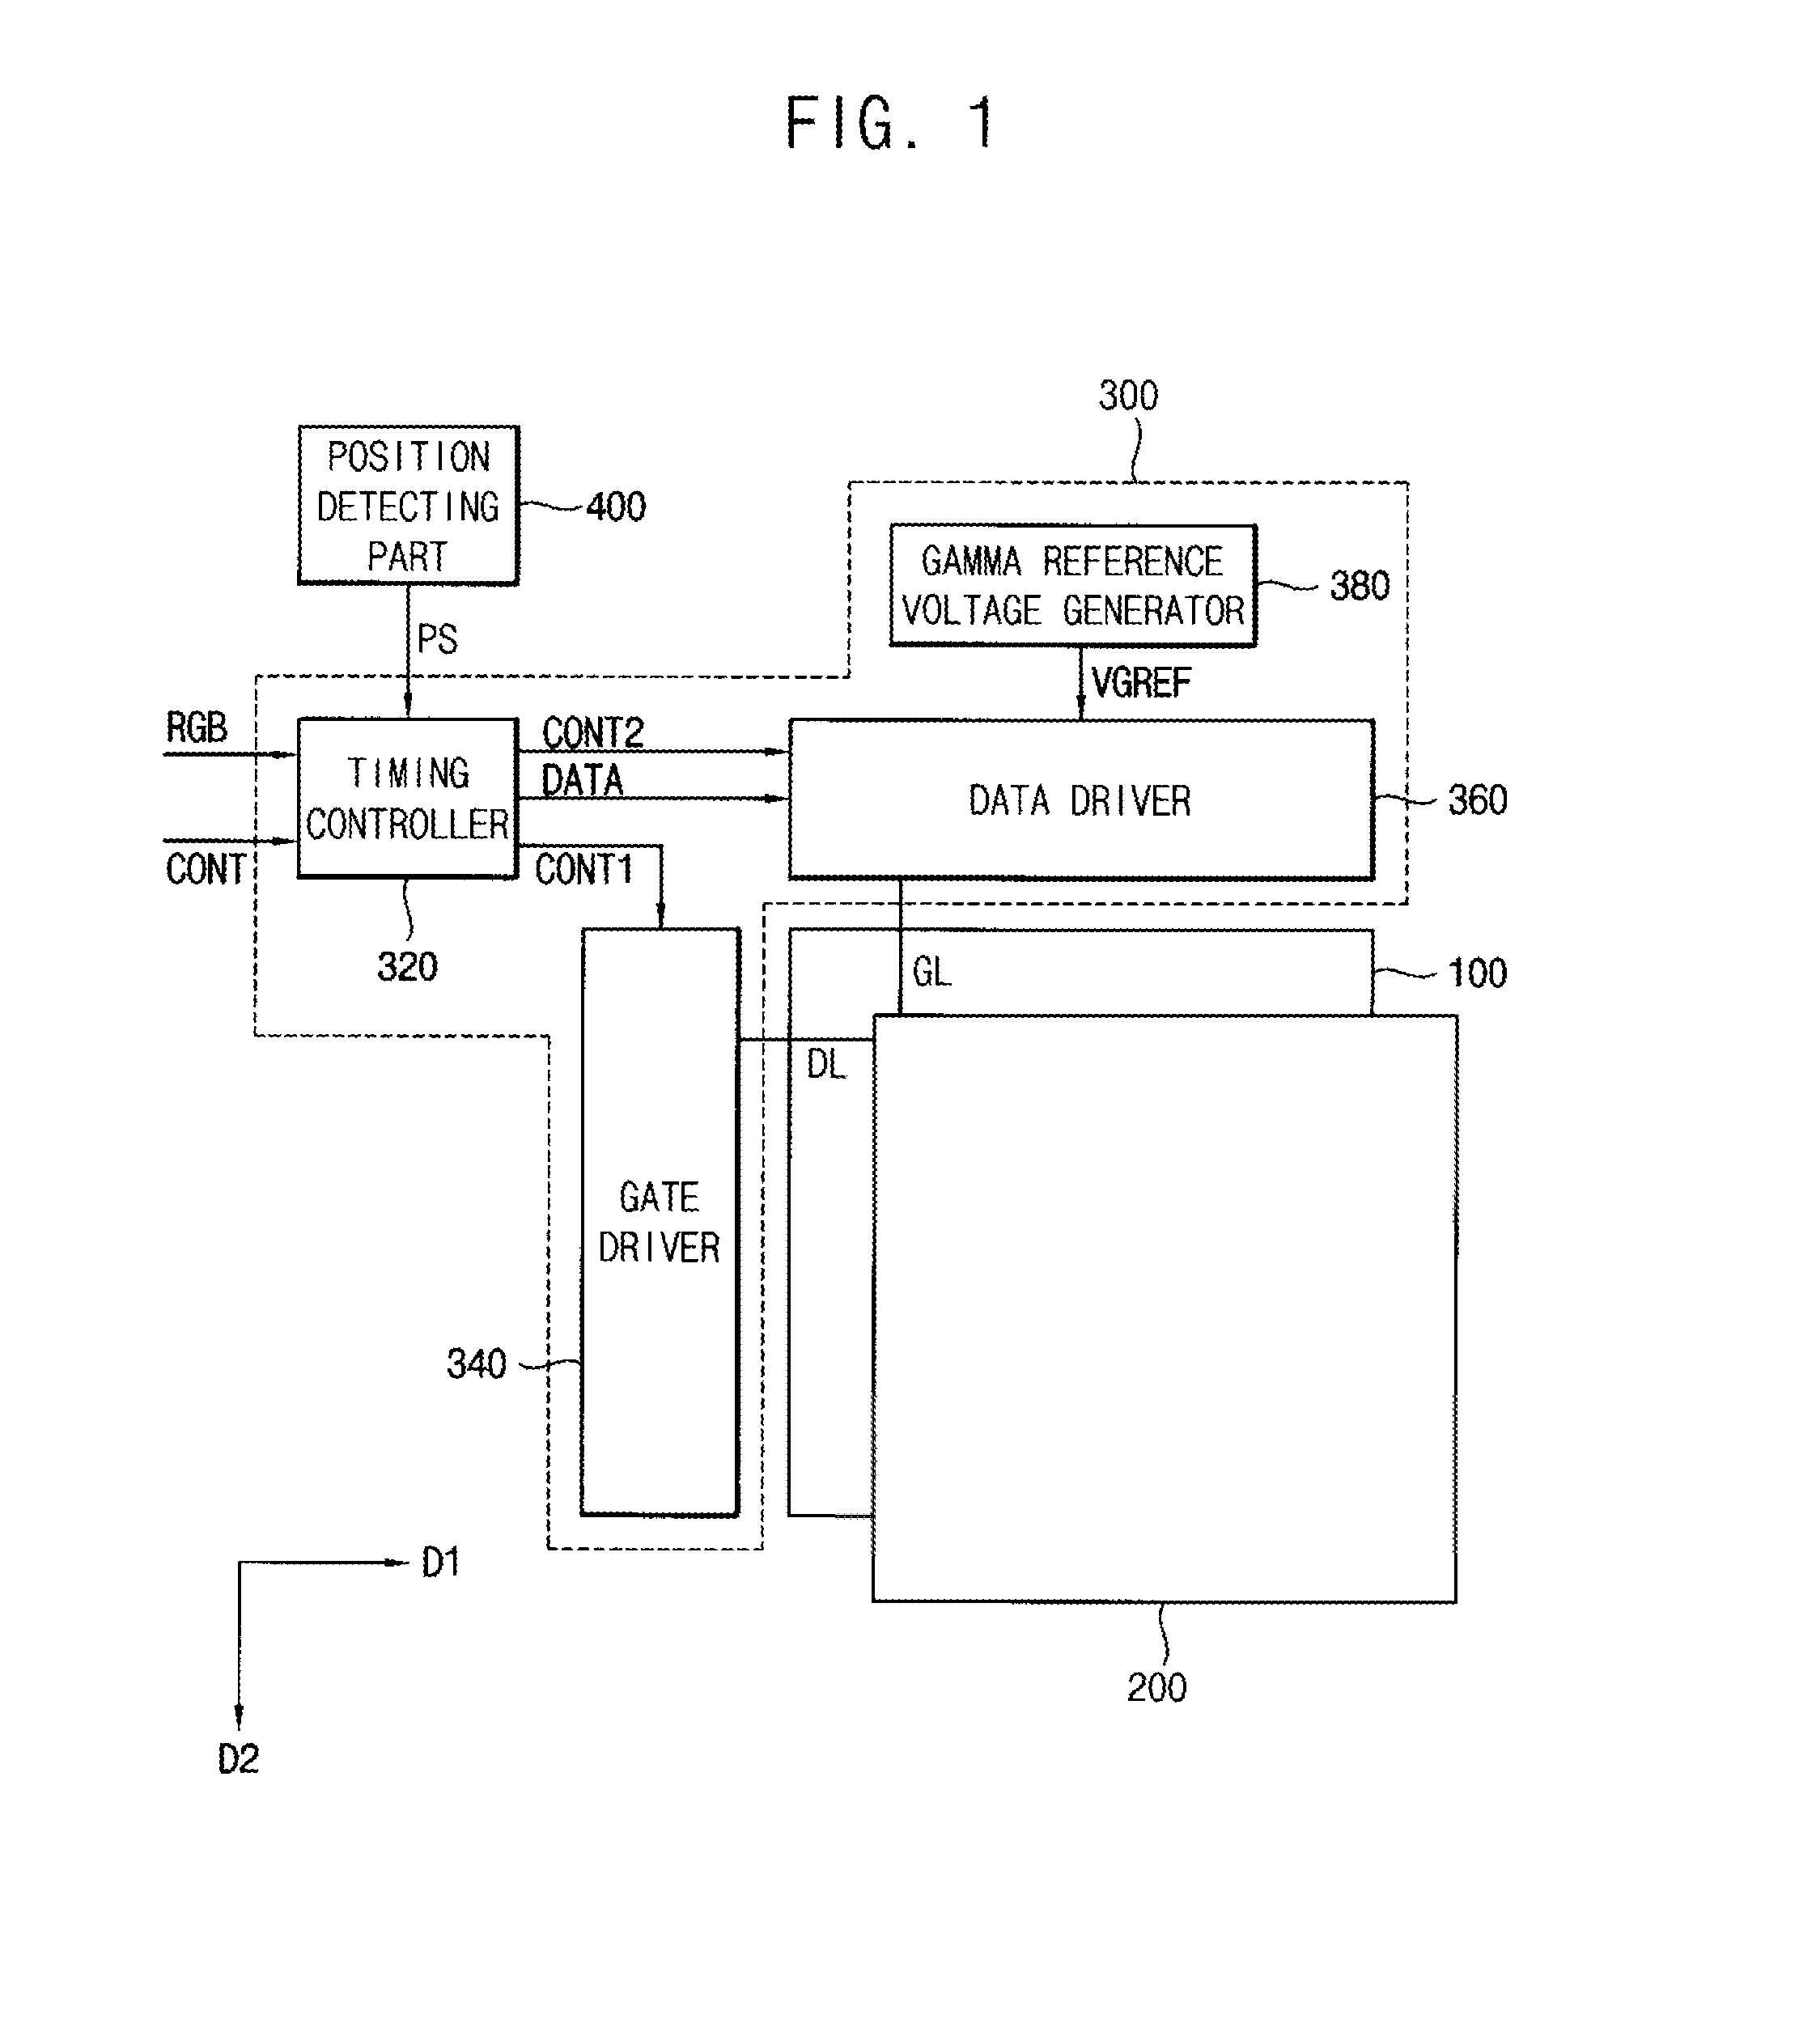 Display apparatus and method for enabling perception of three-dimensional images